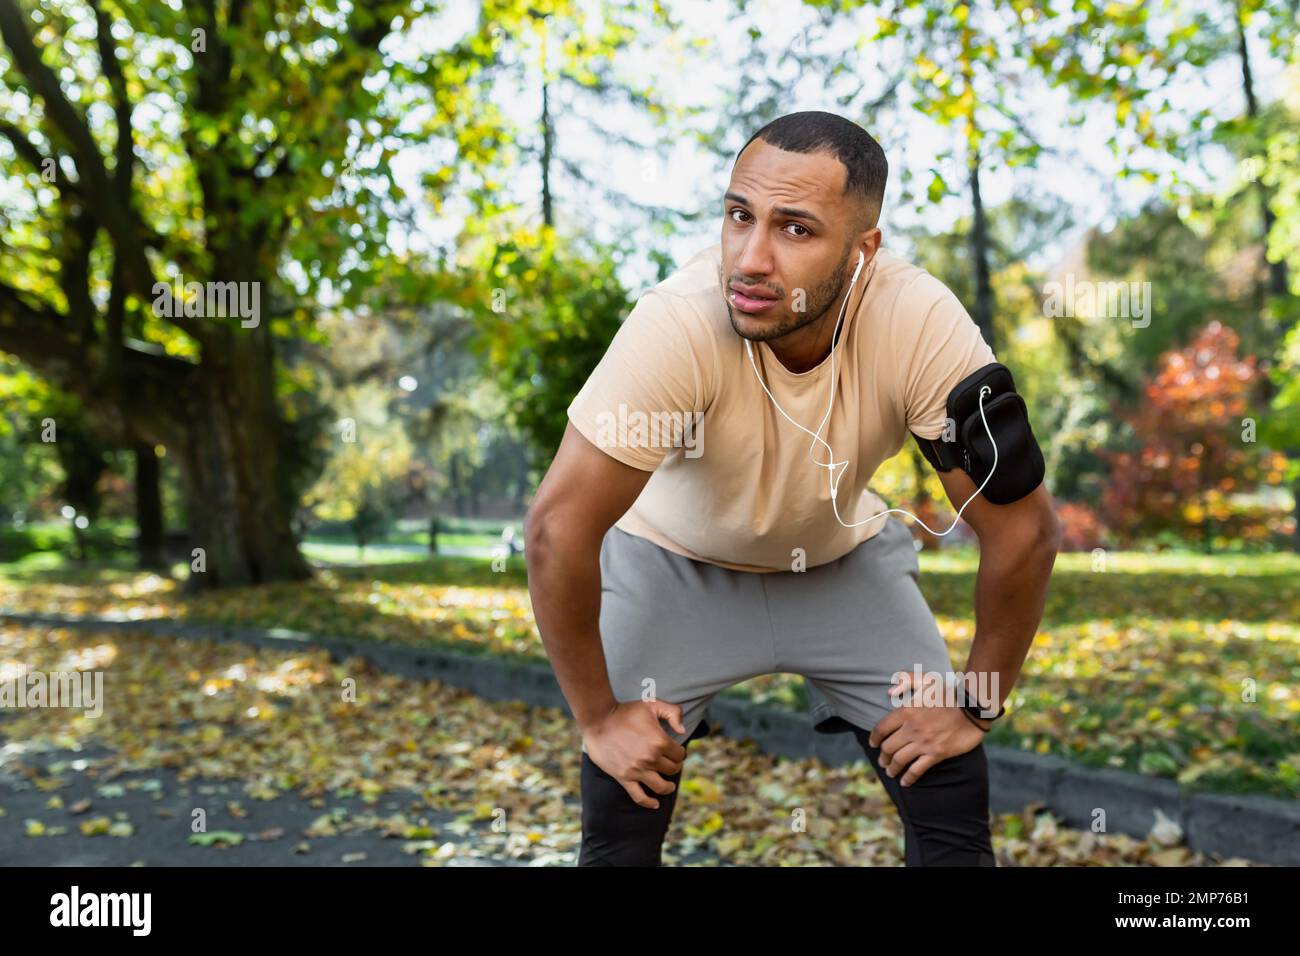 Young African American male athlete resting after jogging, listening to music in headphones. Tiredly looking at the camera. Stock Photo